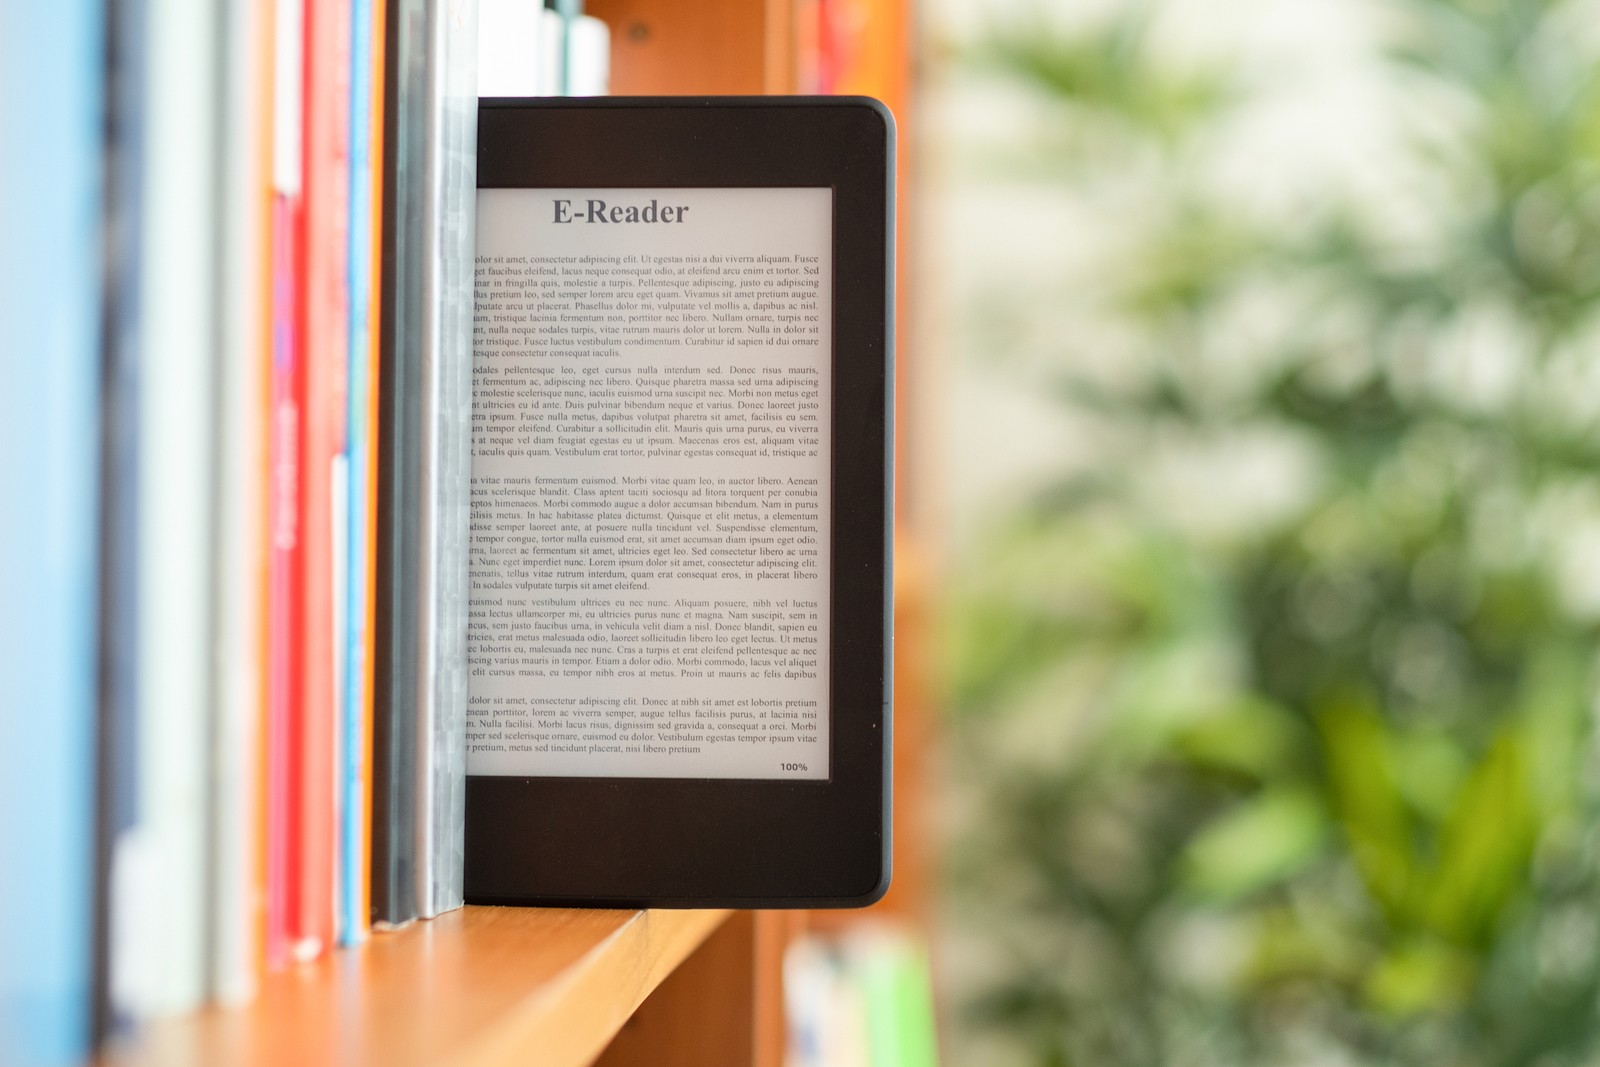 How Does Ebook Pricing Work?